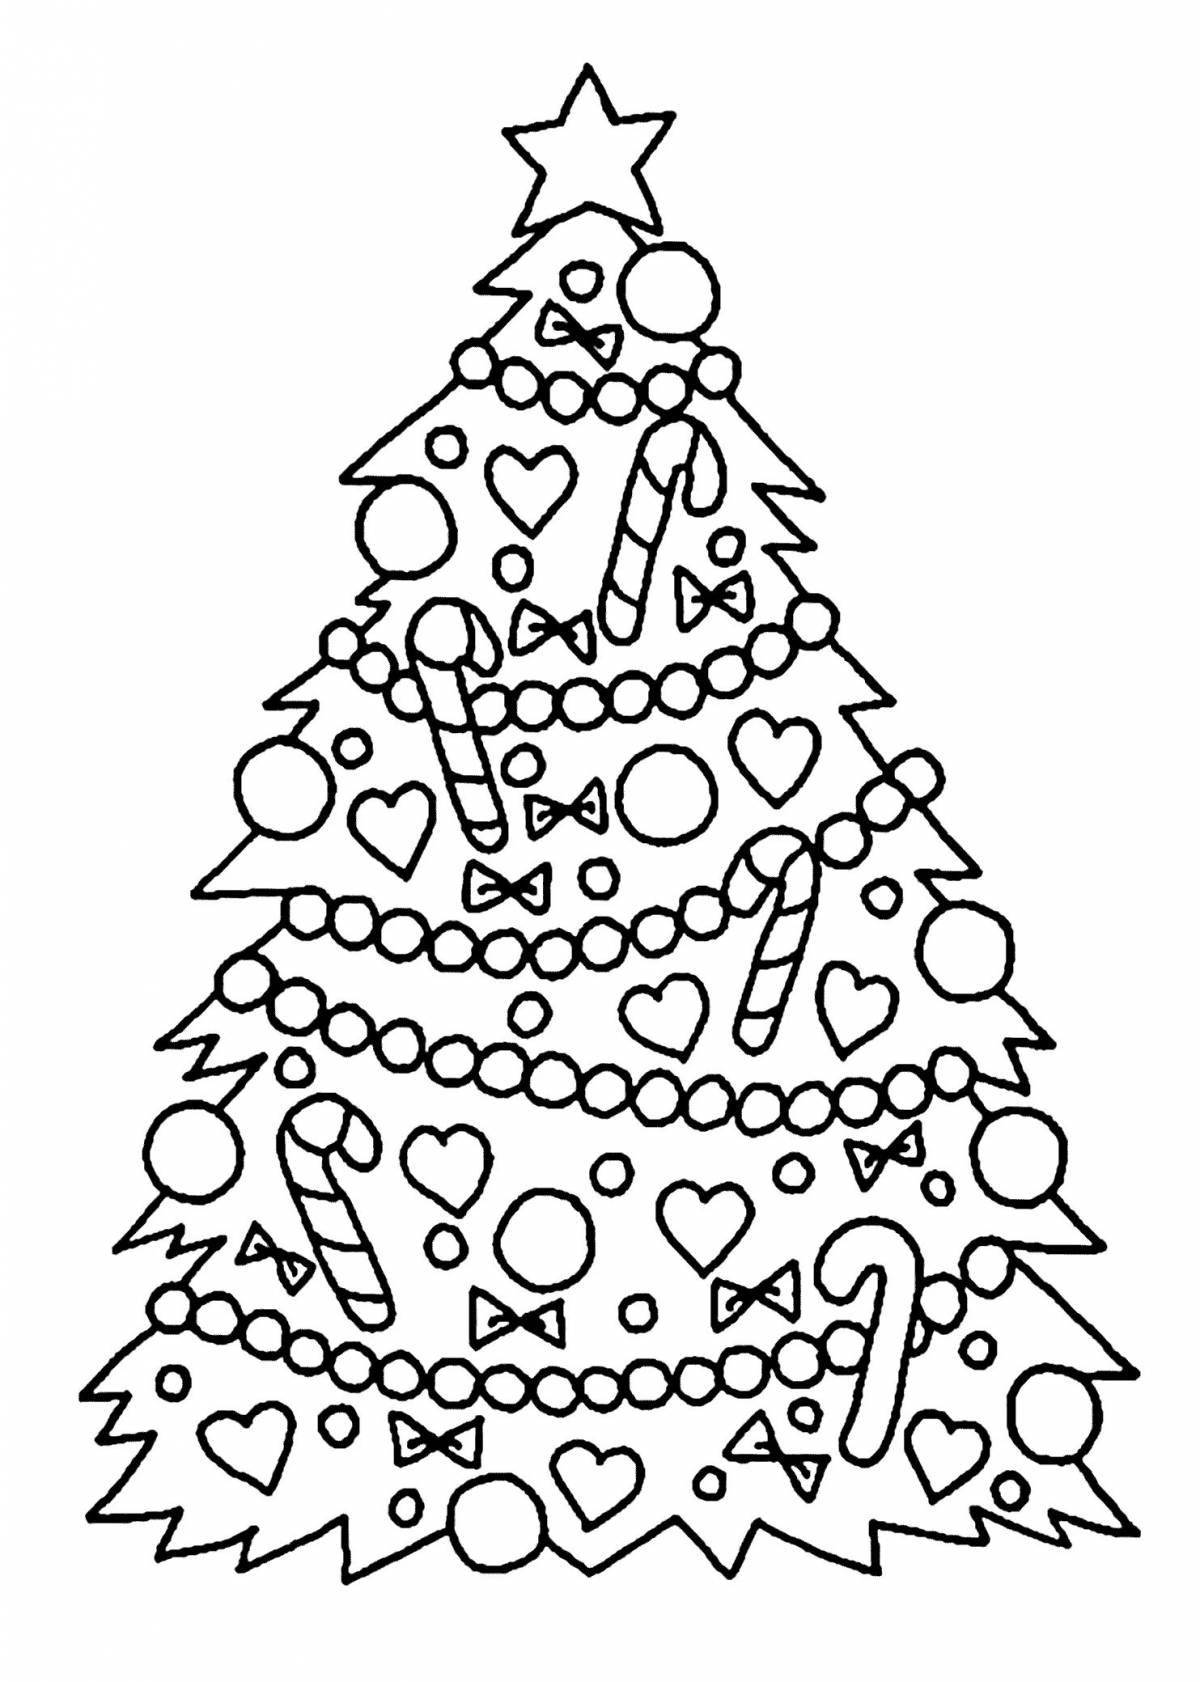 Coloring book big Christmas tree for children 6-7 years old